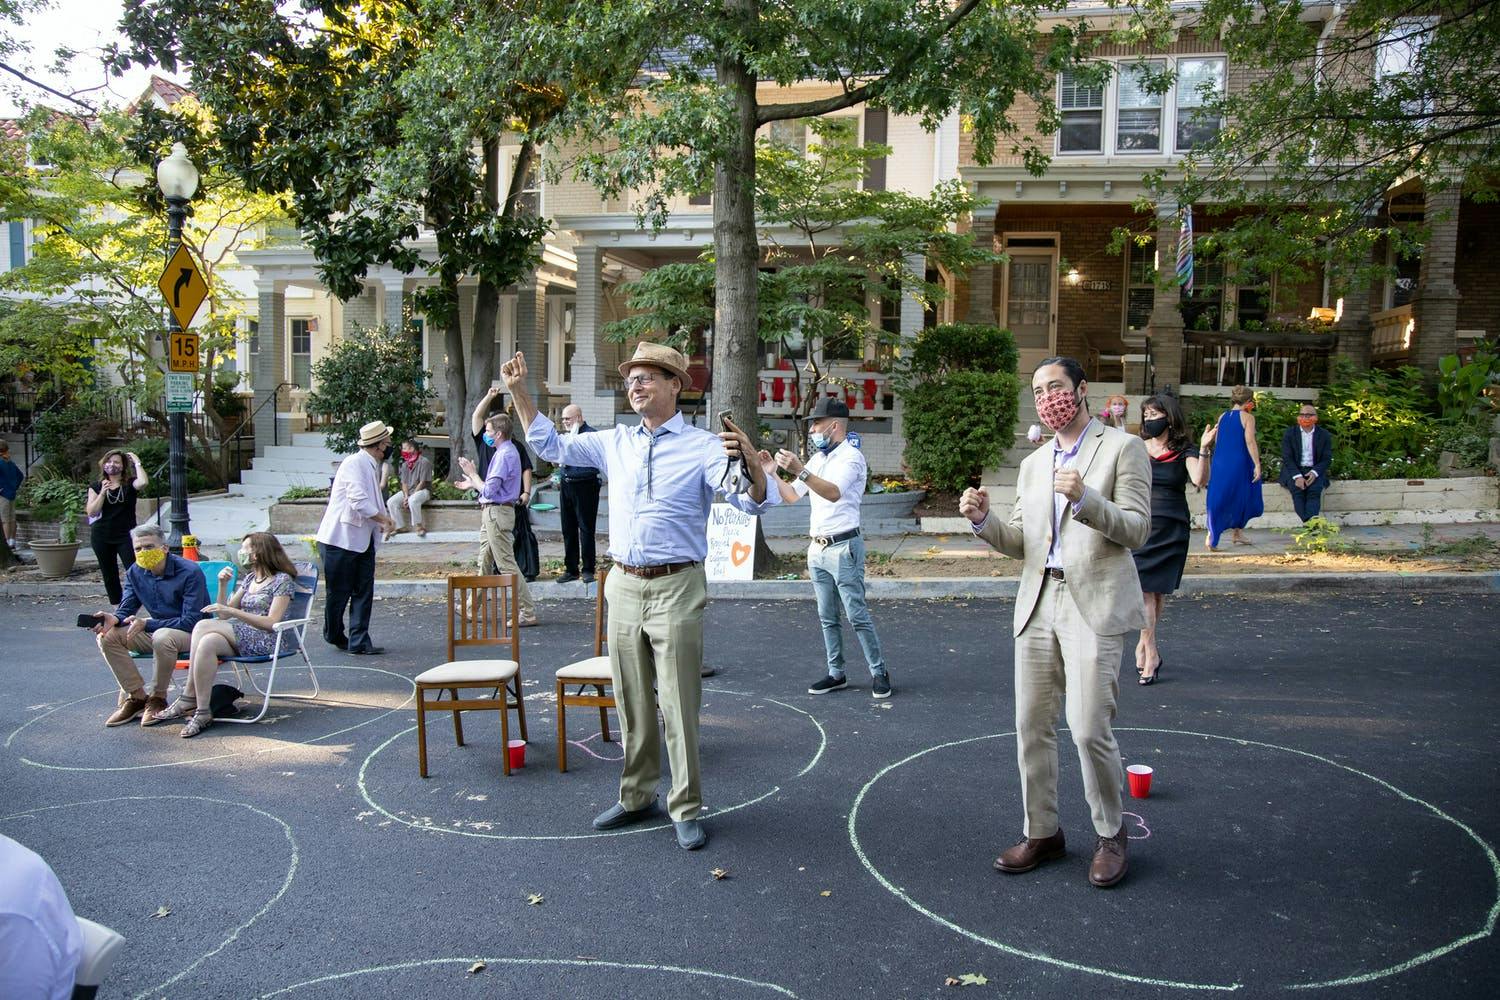 Social-Distance Wedding With StreetSide Seating and Dancing in Designated Chalk Circles | PartySlate